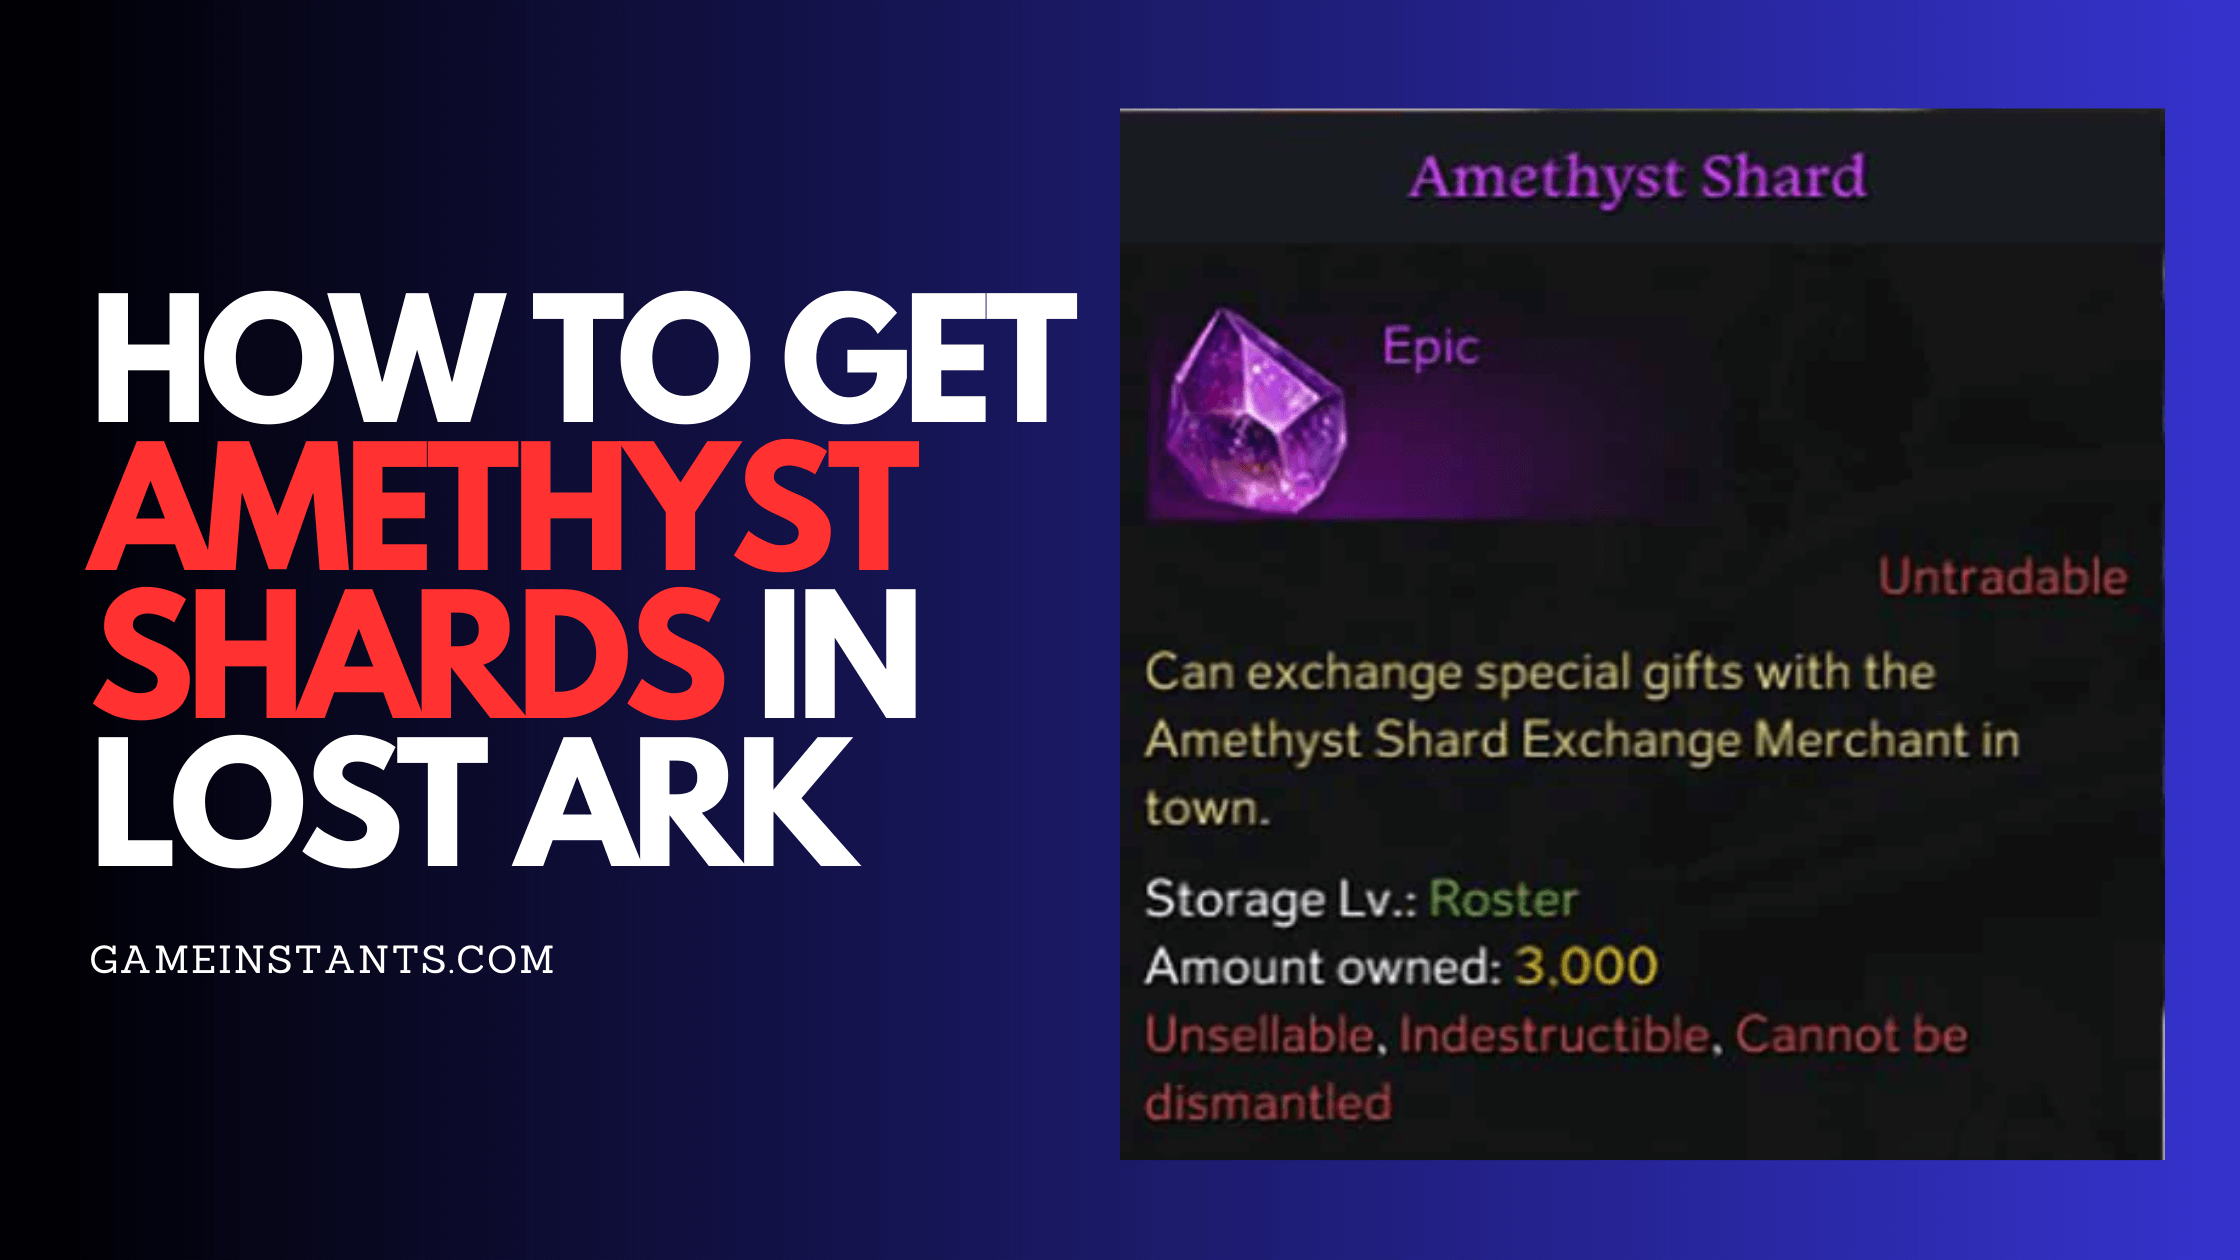 how to get amethyst shards lost ark